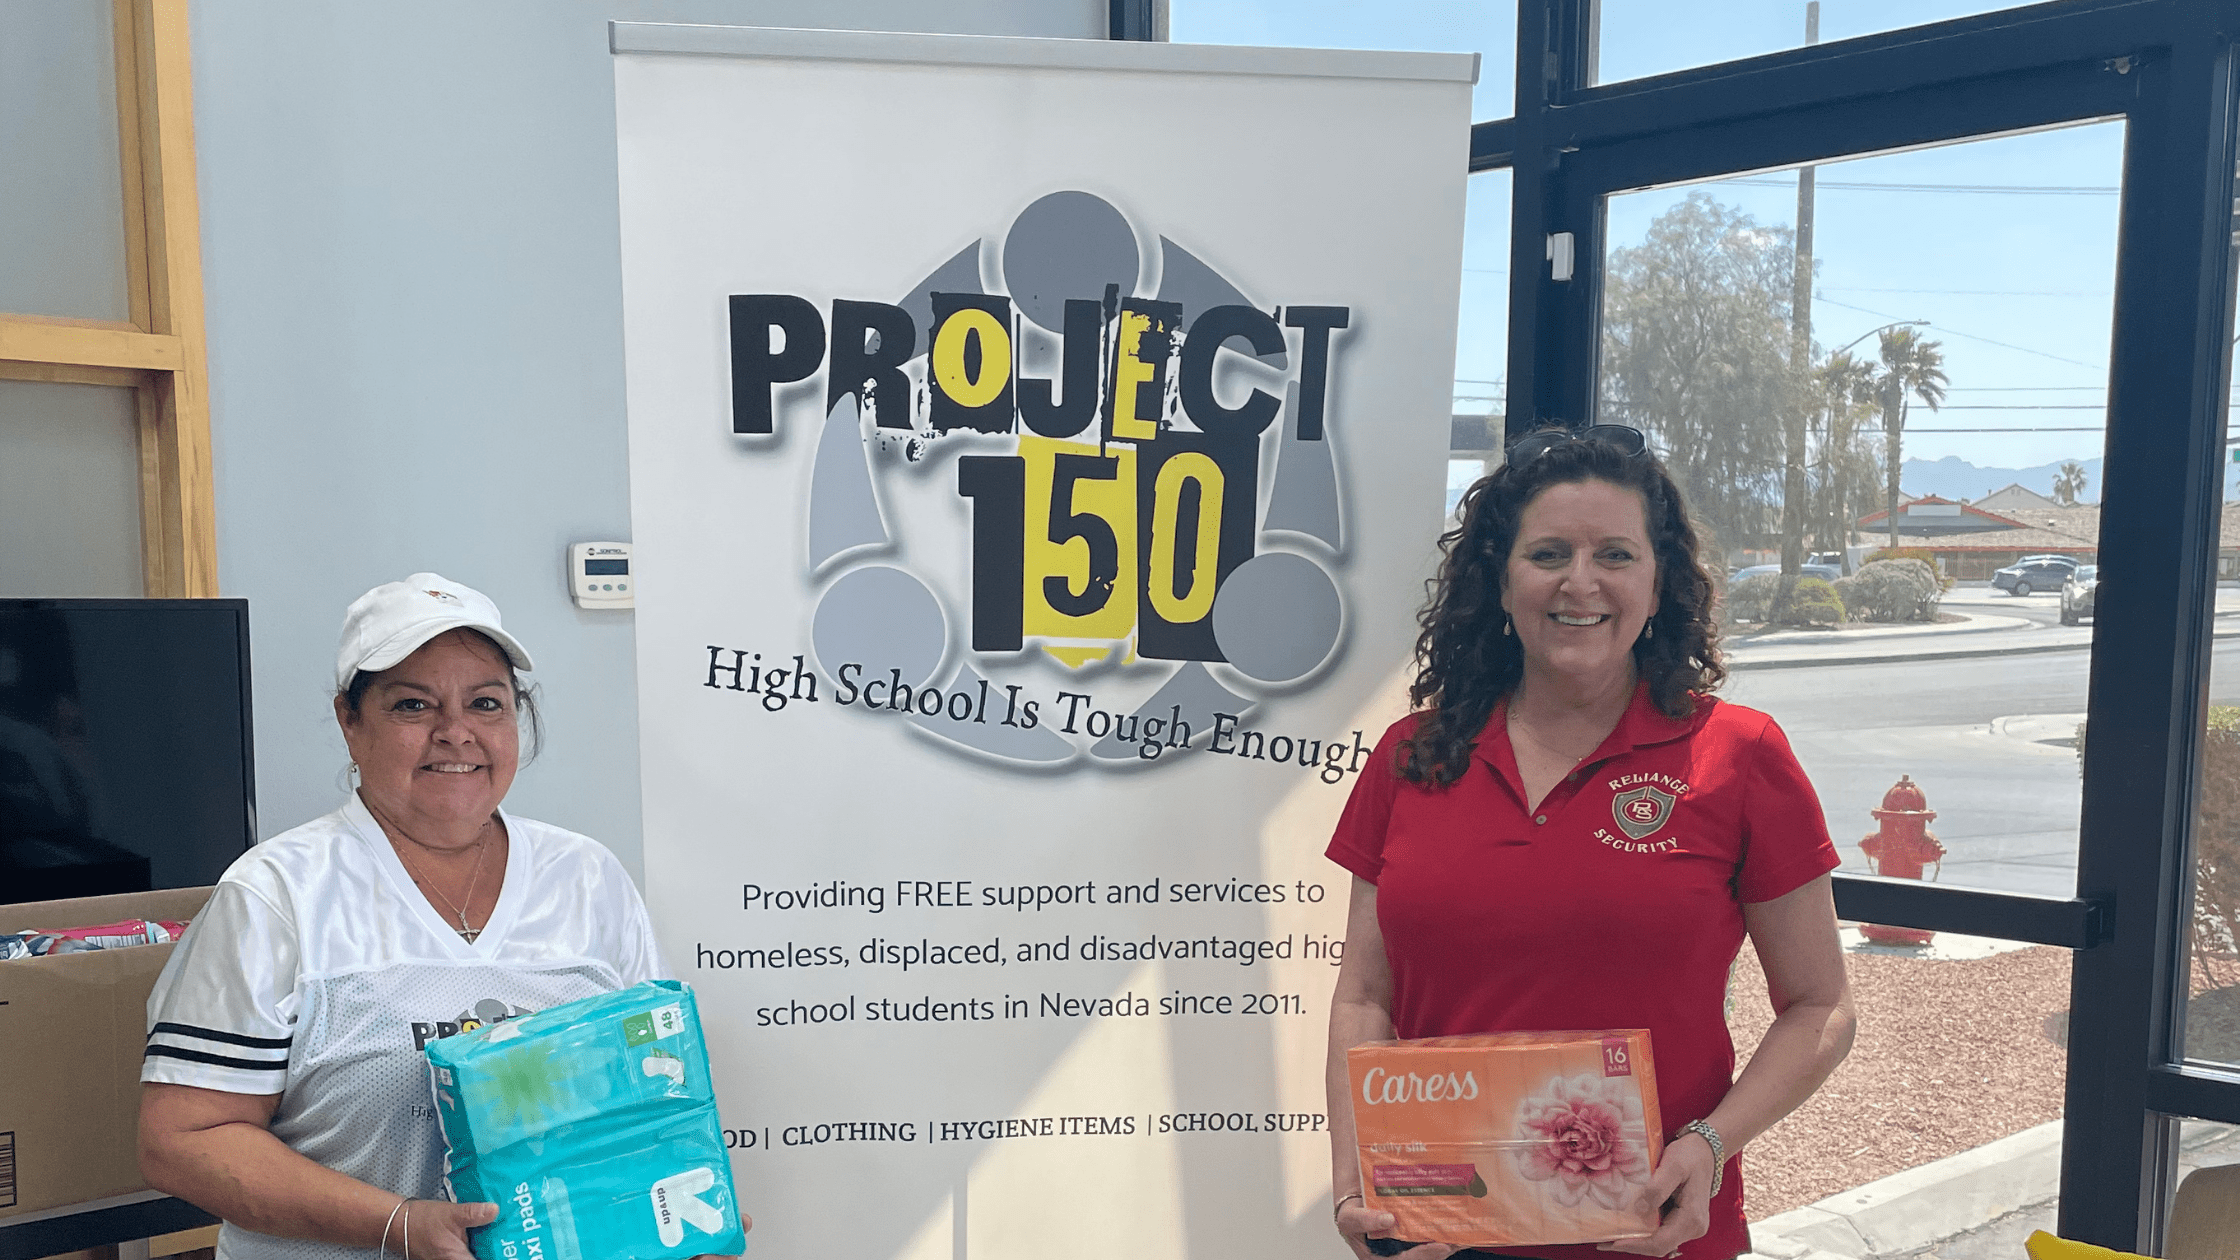 Reliance Security Donates Supplies to Help Homeless Youth in Las Vegas